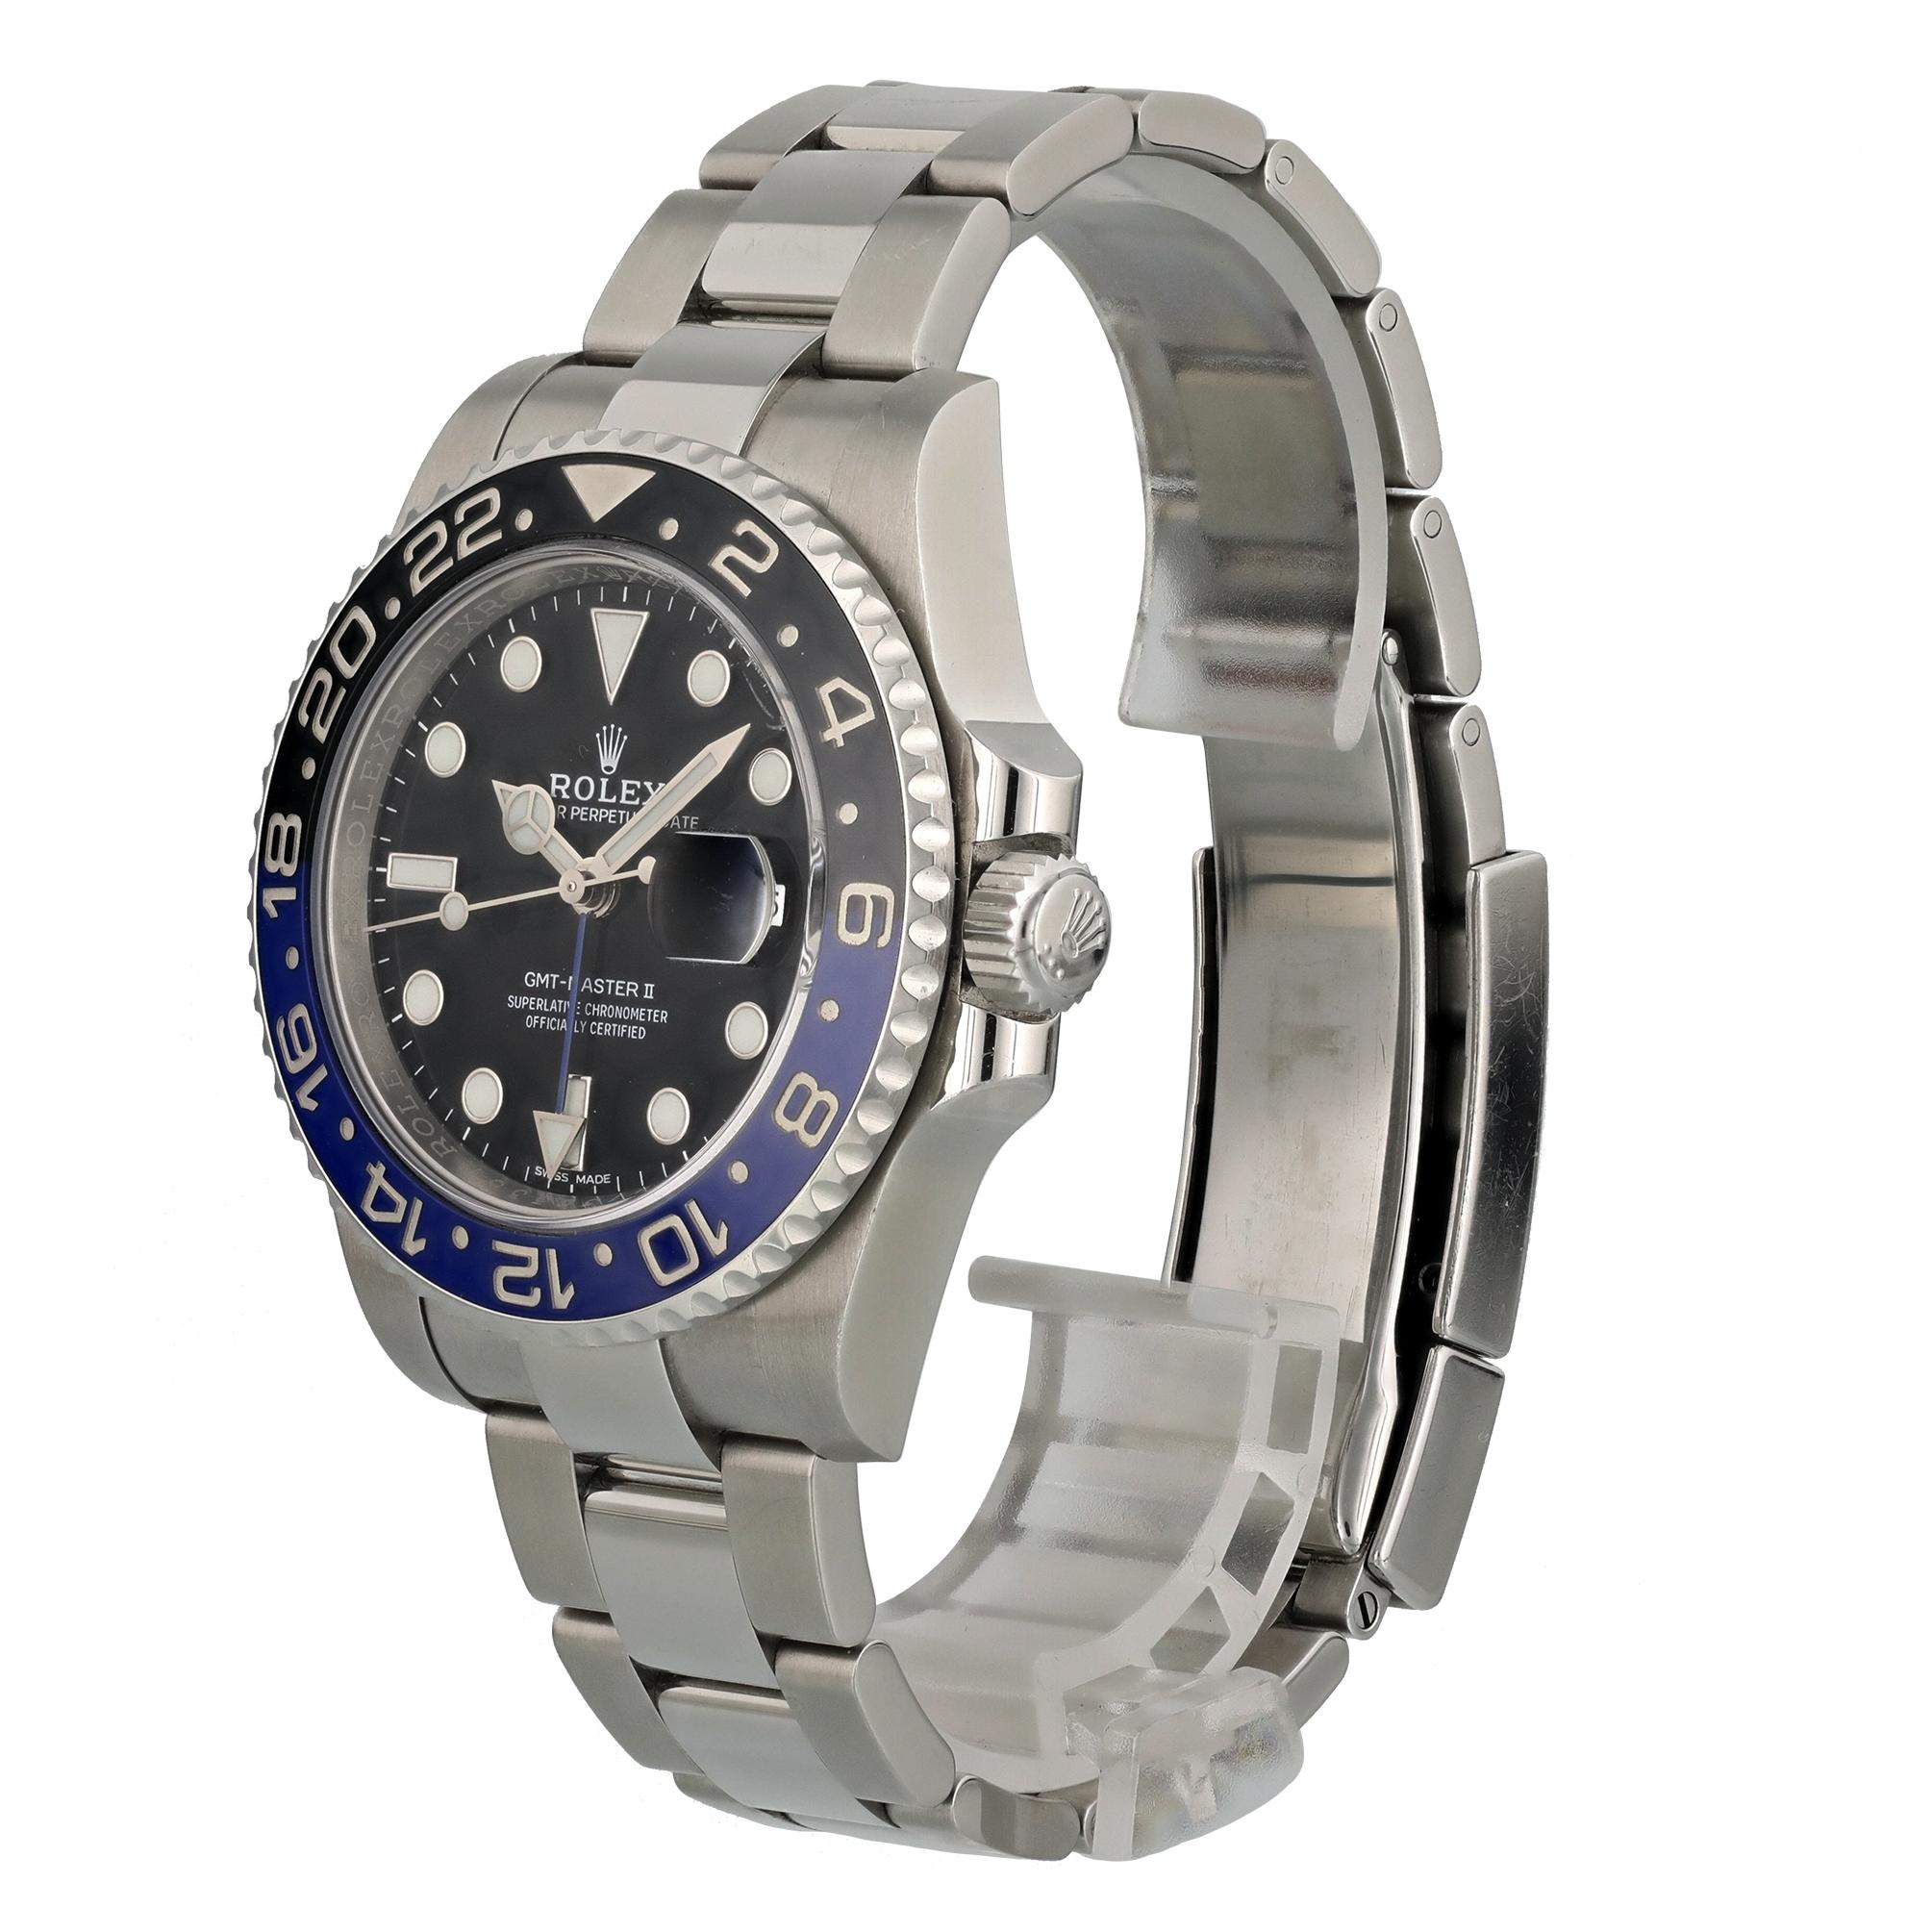 Rolex GMT Master II 116710 Men Watch. 
40mm Stainless Steel case. 
Bi-directional rotating blue and black Batman bezel. 
Black dial with luminous steel hands and dot hour markers. 
Date display at the 3 o'clock position. 
Minute markers on the outer